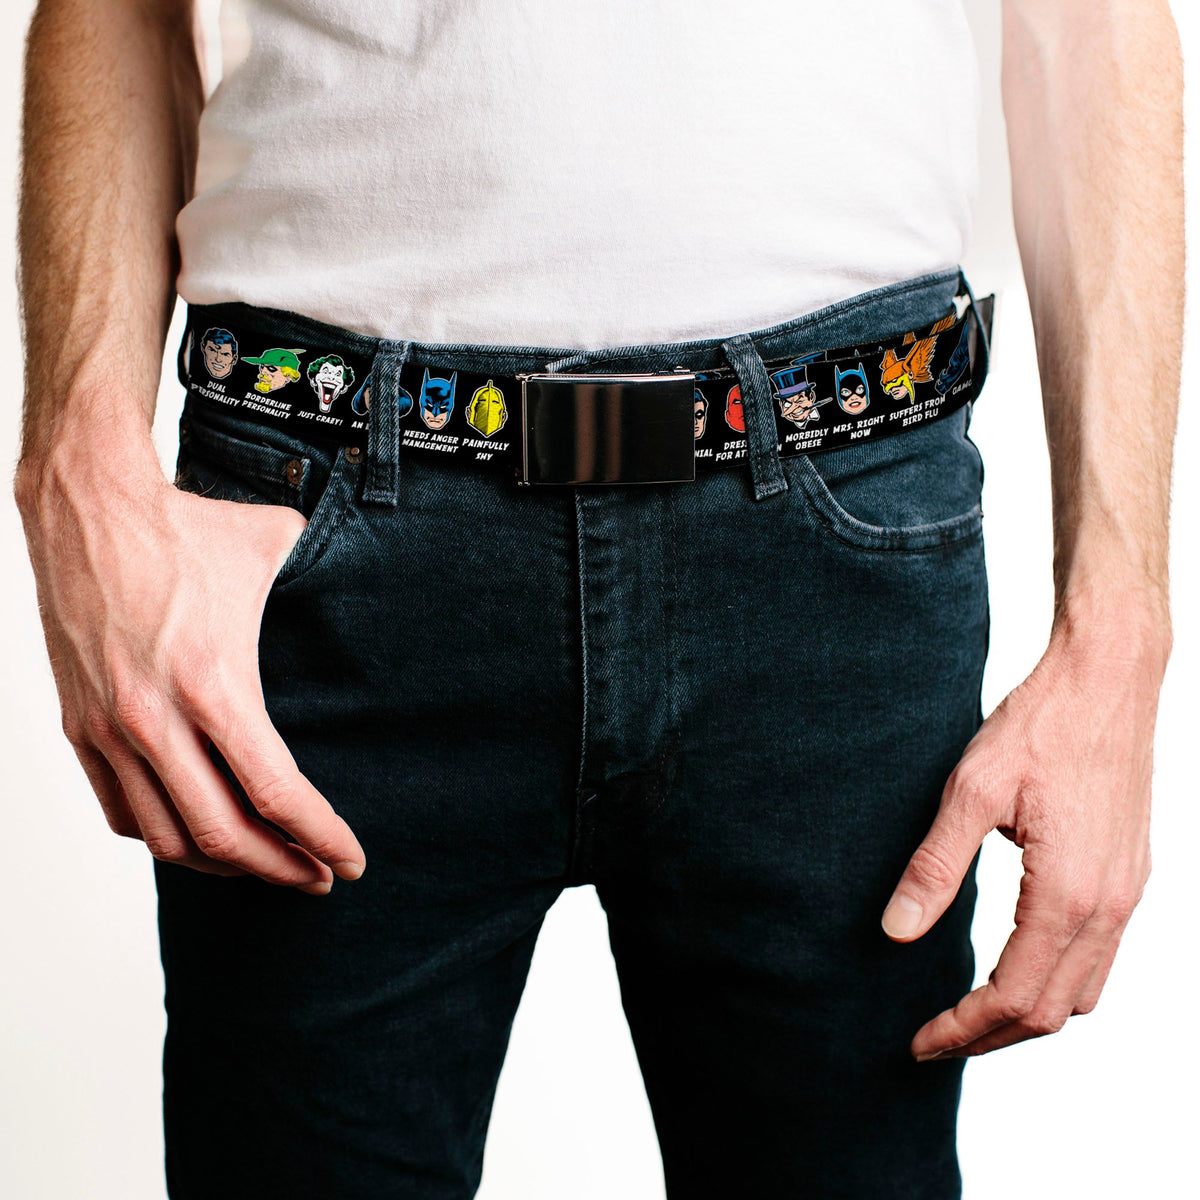 Chrome Buckle Web Belt - DC Originals SUPER HEROES HAVE ISSUES TOO! Faces/Issues Black Webbing